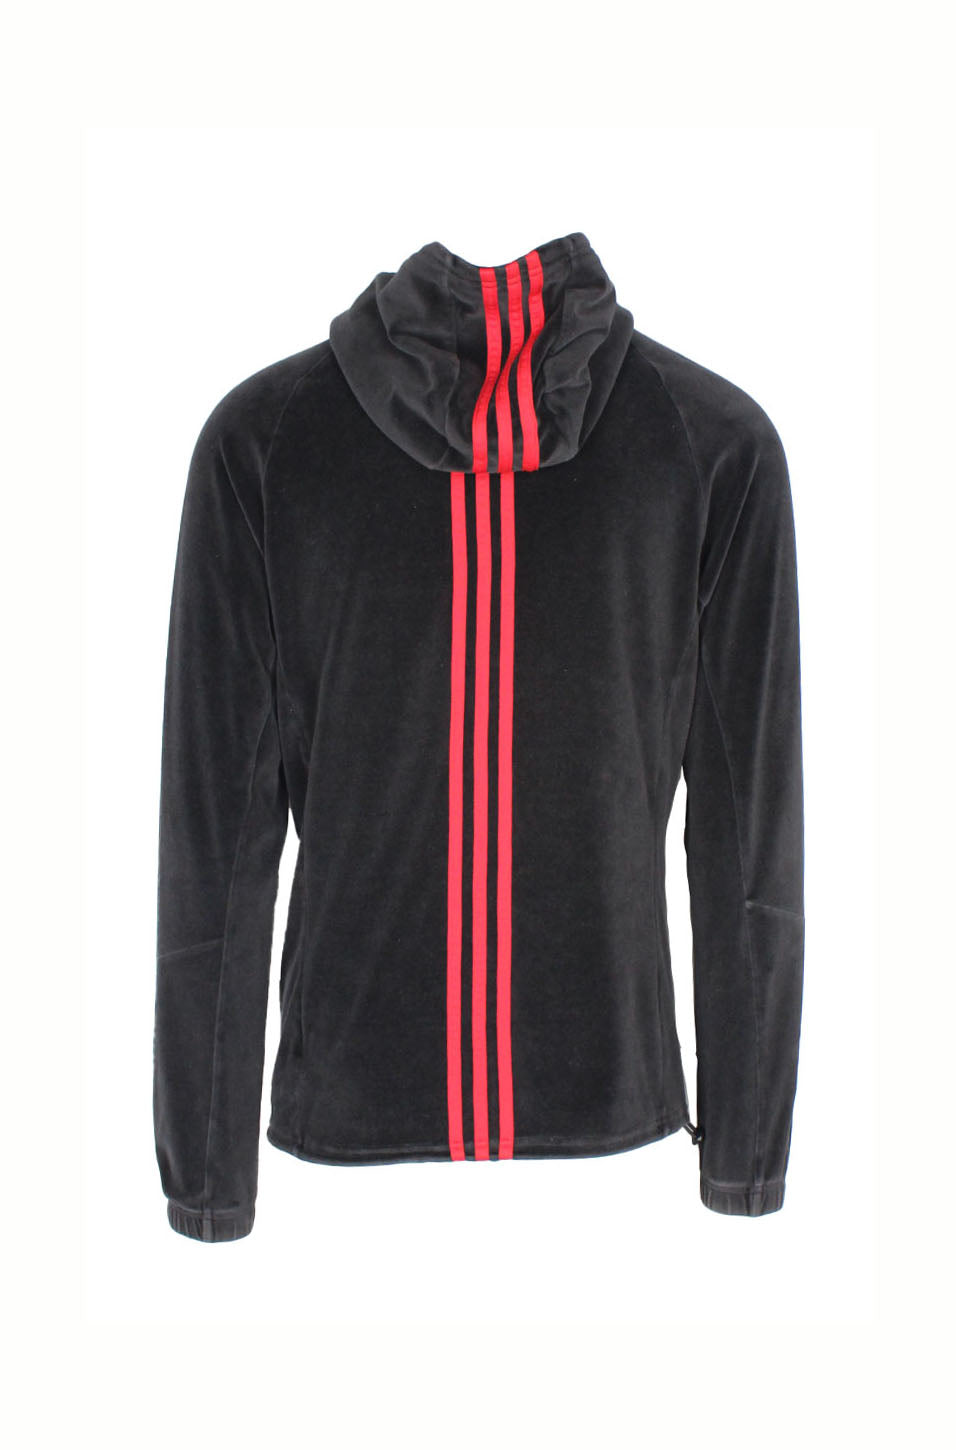 rear view with adidas signature red stripes at hood/back of hoodie.